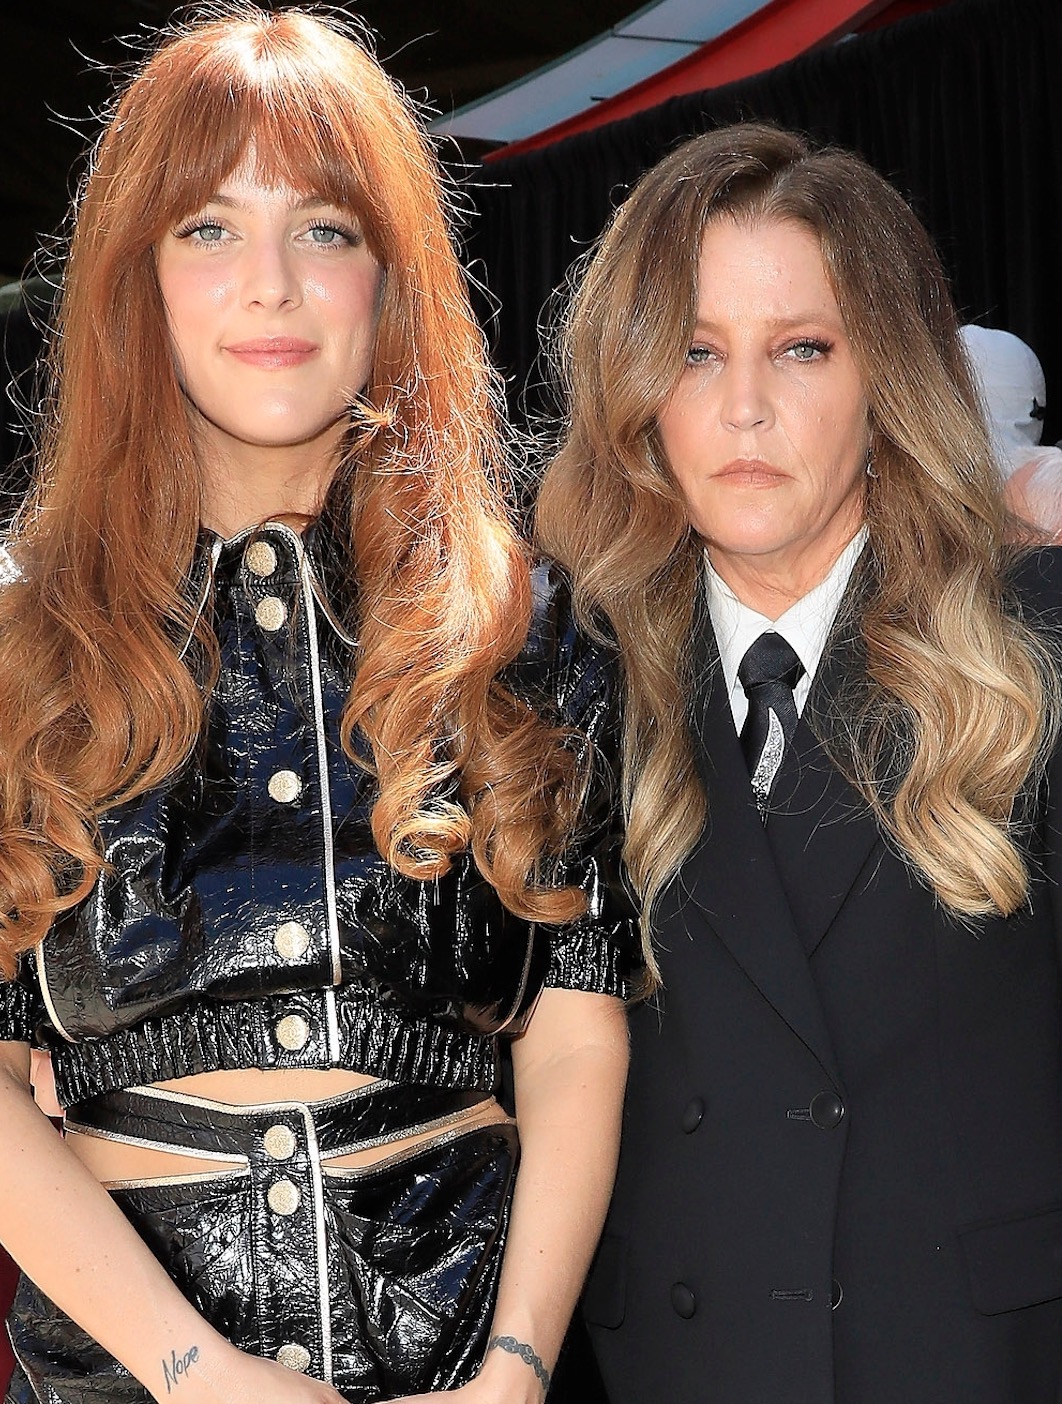 Priscilla Presley and Granddaughter Riley Keough Close Out Legal Proceeding in Battle for Lisa Marie's Estate | Priscilla and Riley have been involved in a legal battle against each other over the estate of the late Lisa Marie Presley.